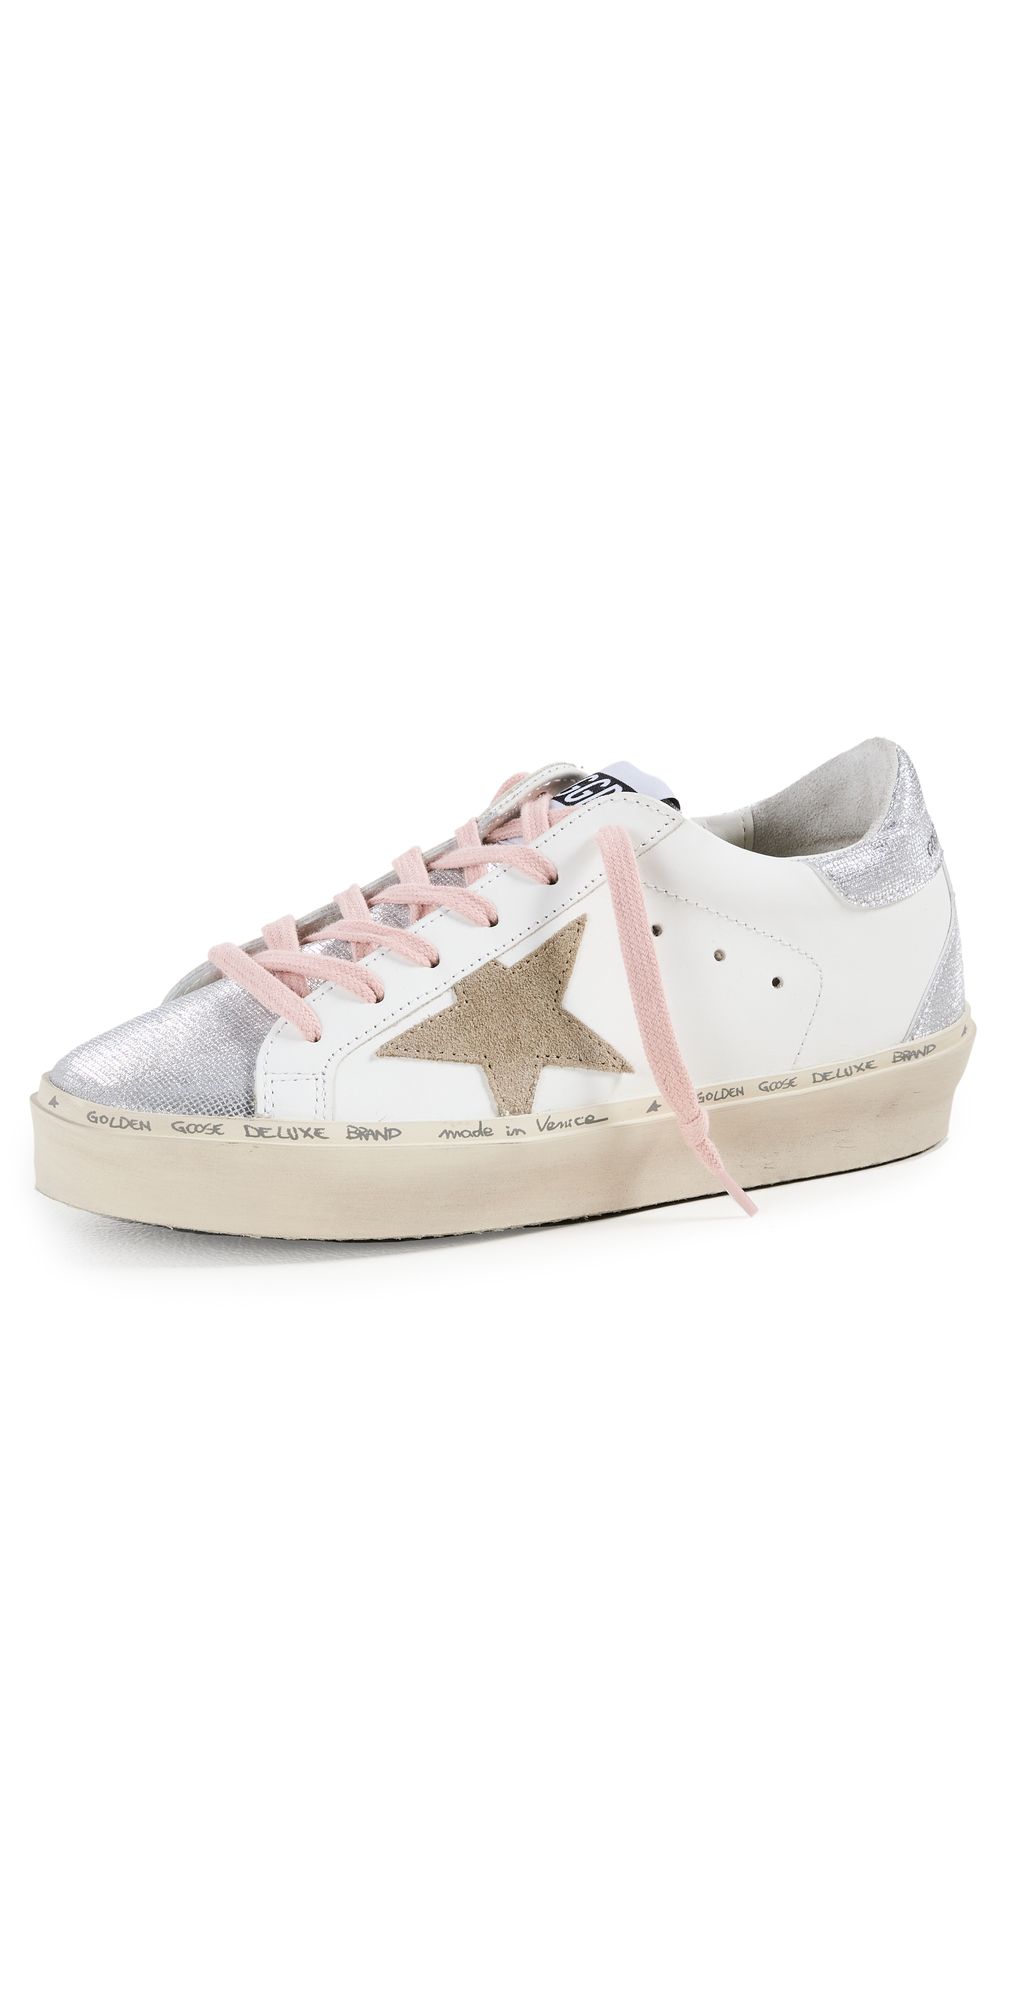 Golden Goose Hi Star Classic Sneakers with Spur Glitter Toe | Shopbop